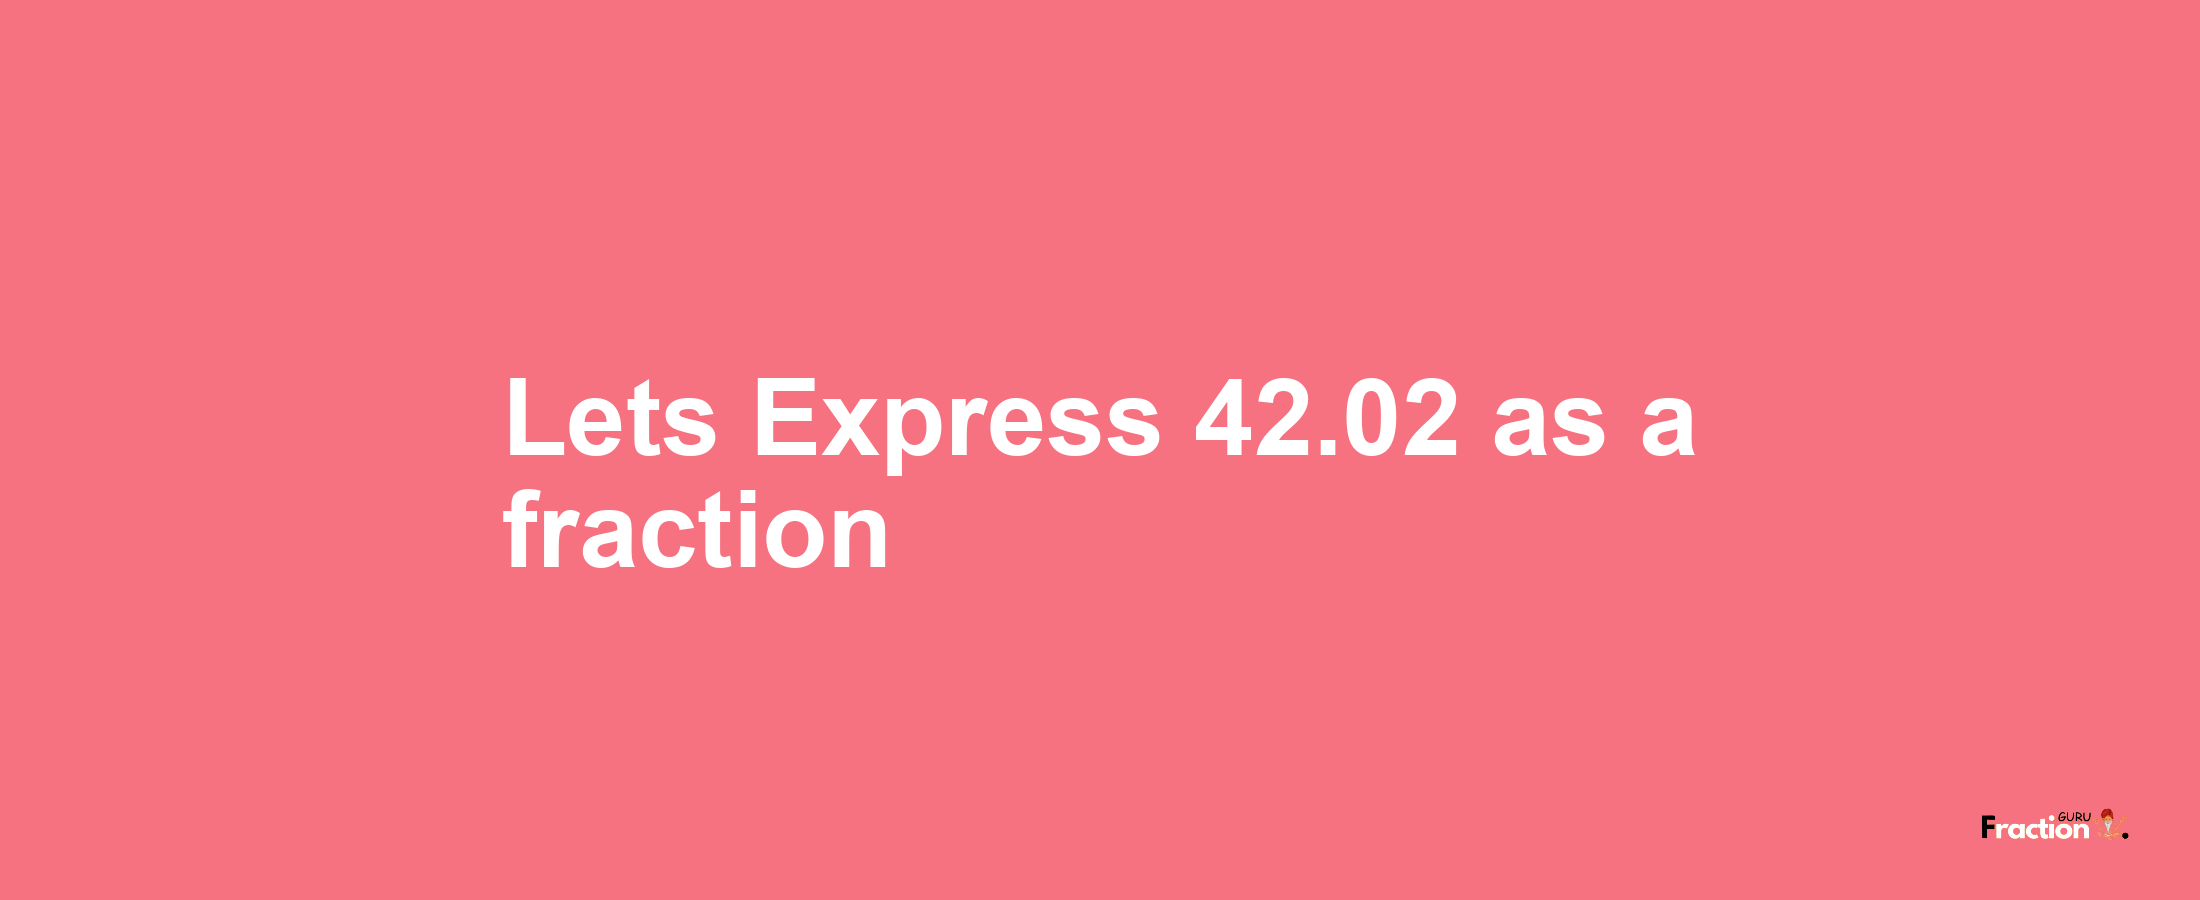 Lets Express 42.02 as afraction